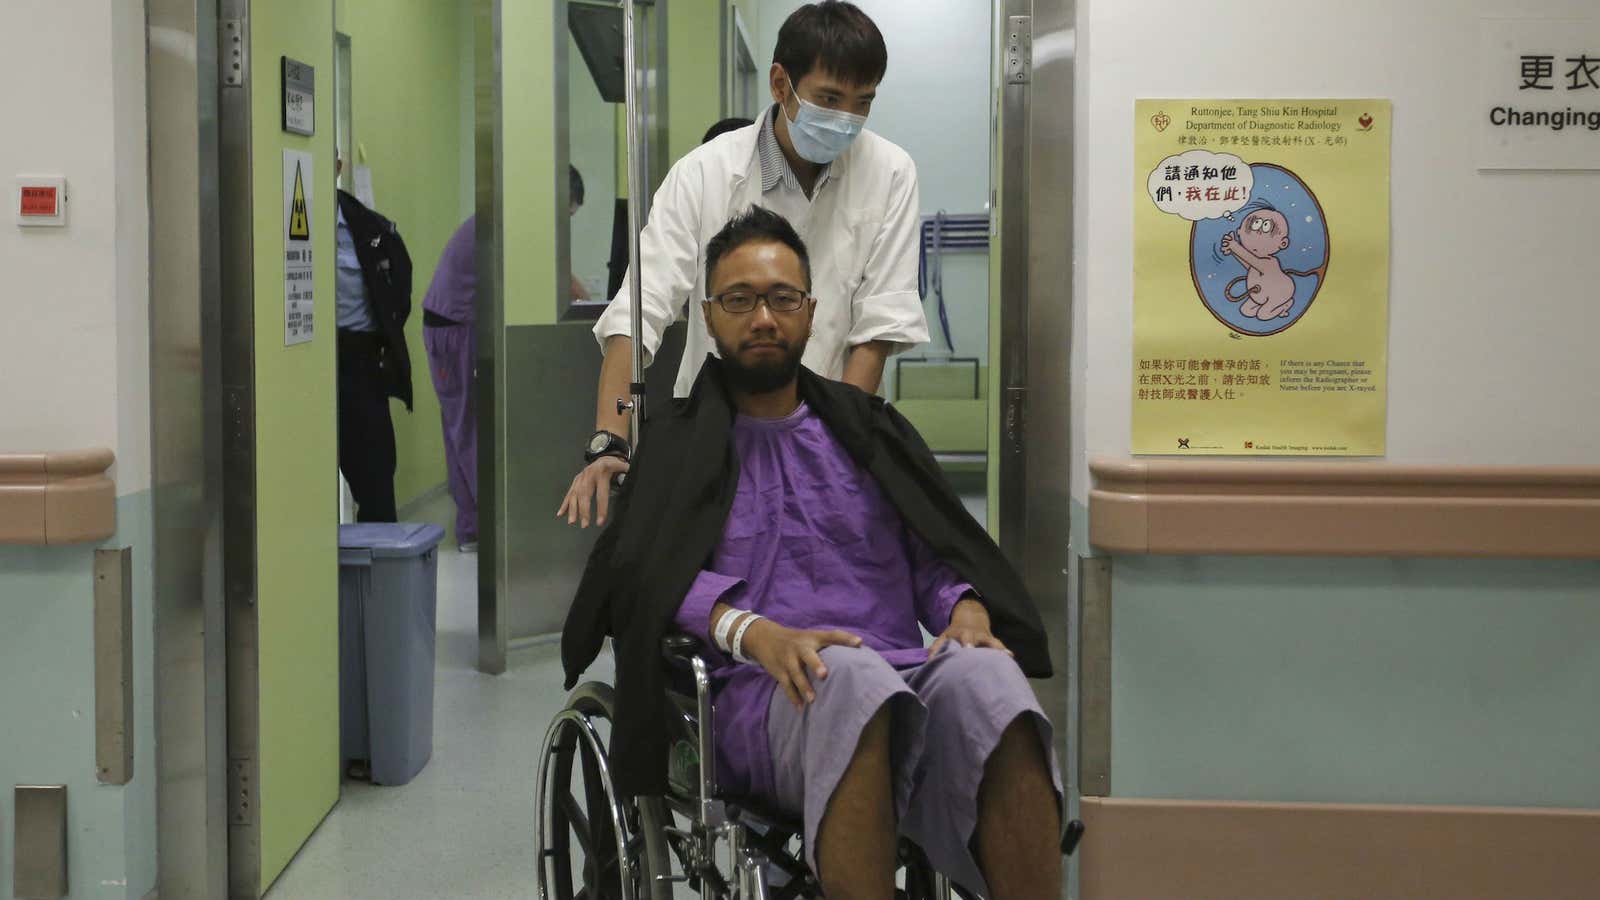 Hong Kong pro-democracy politician Ken Tsang Kin-chiu says he was beaten by police when they cracked down on protesters on Oct. 15.